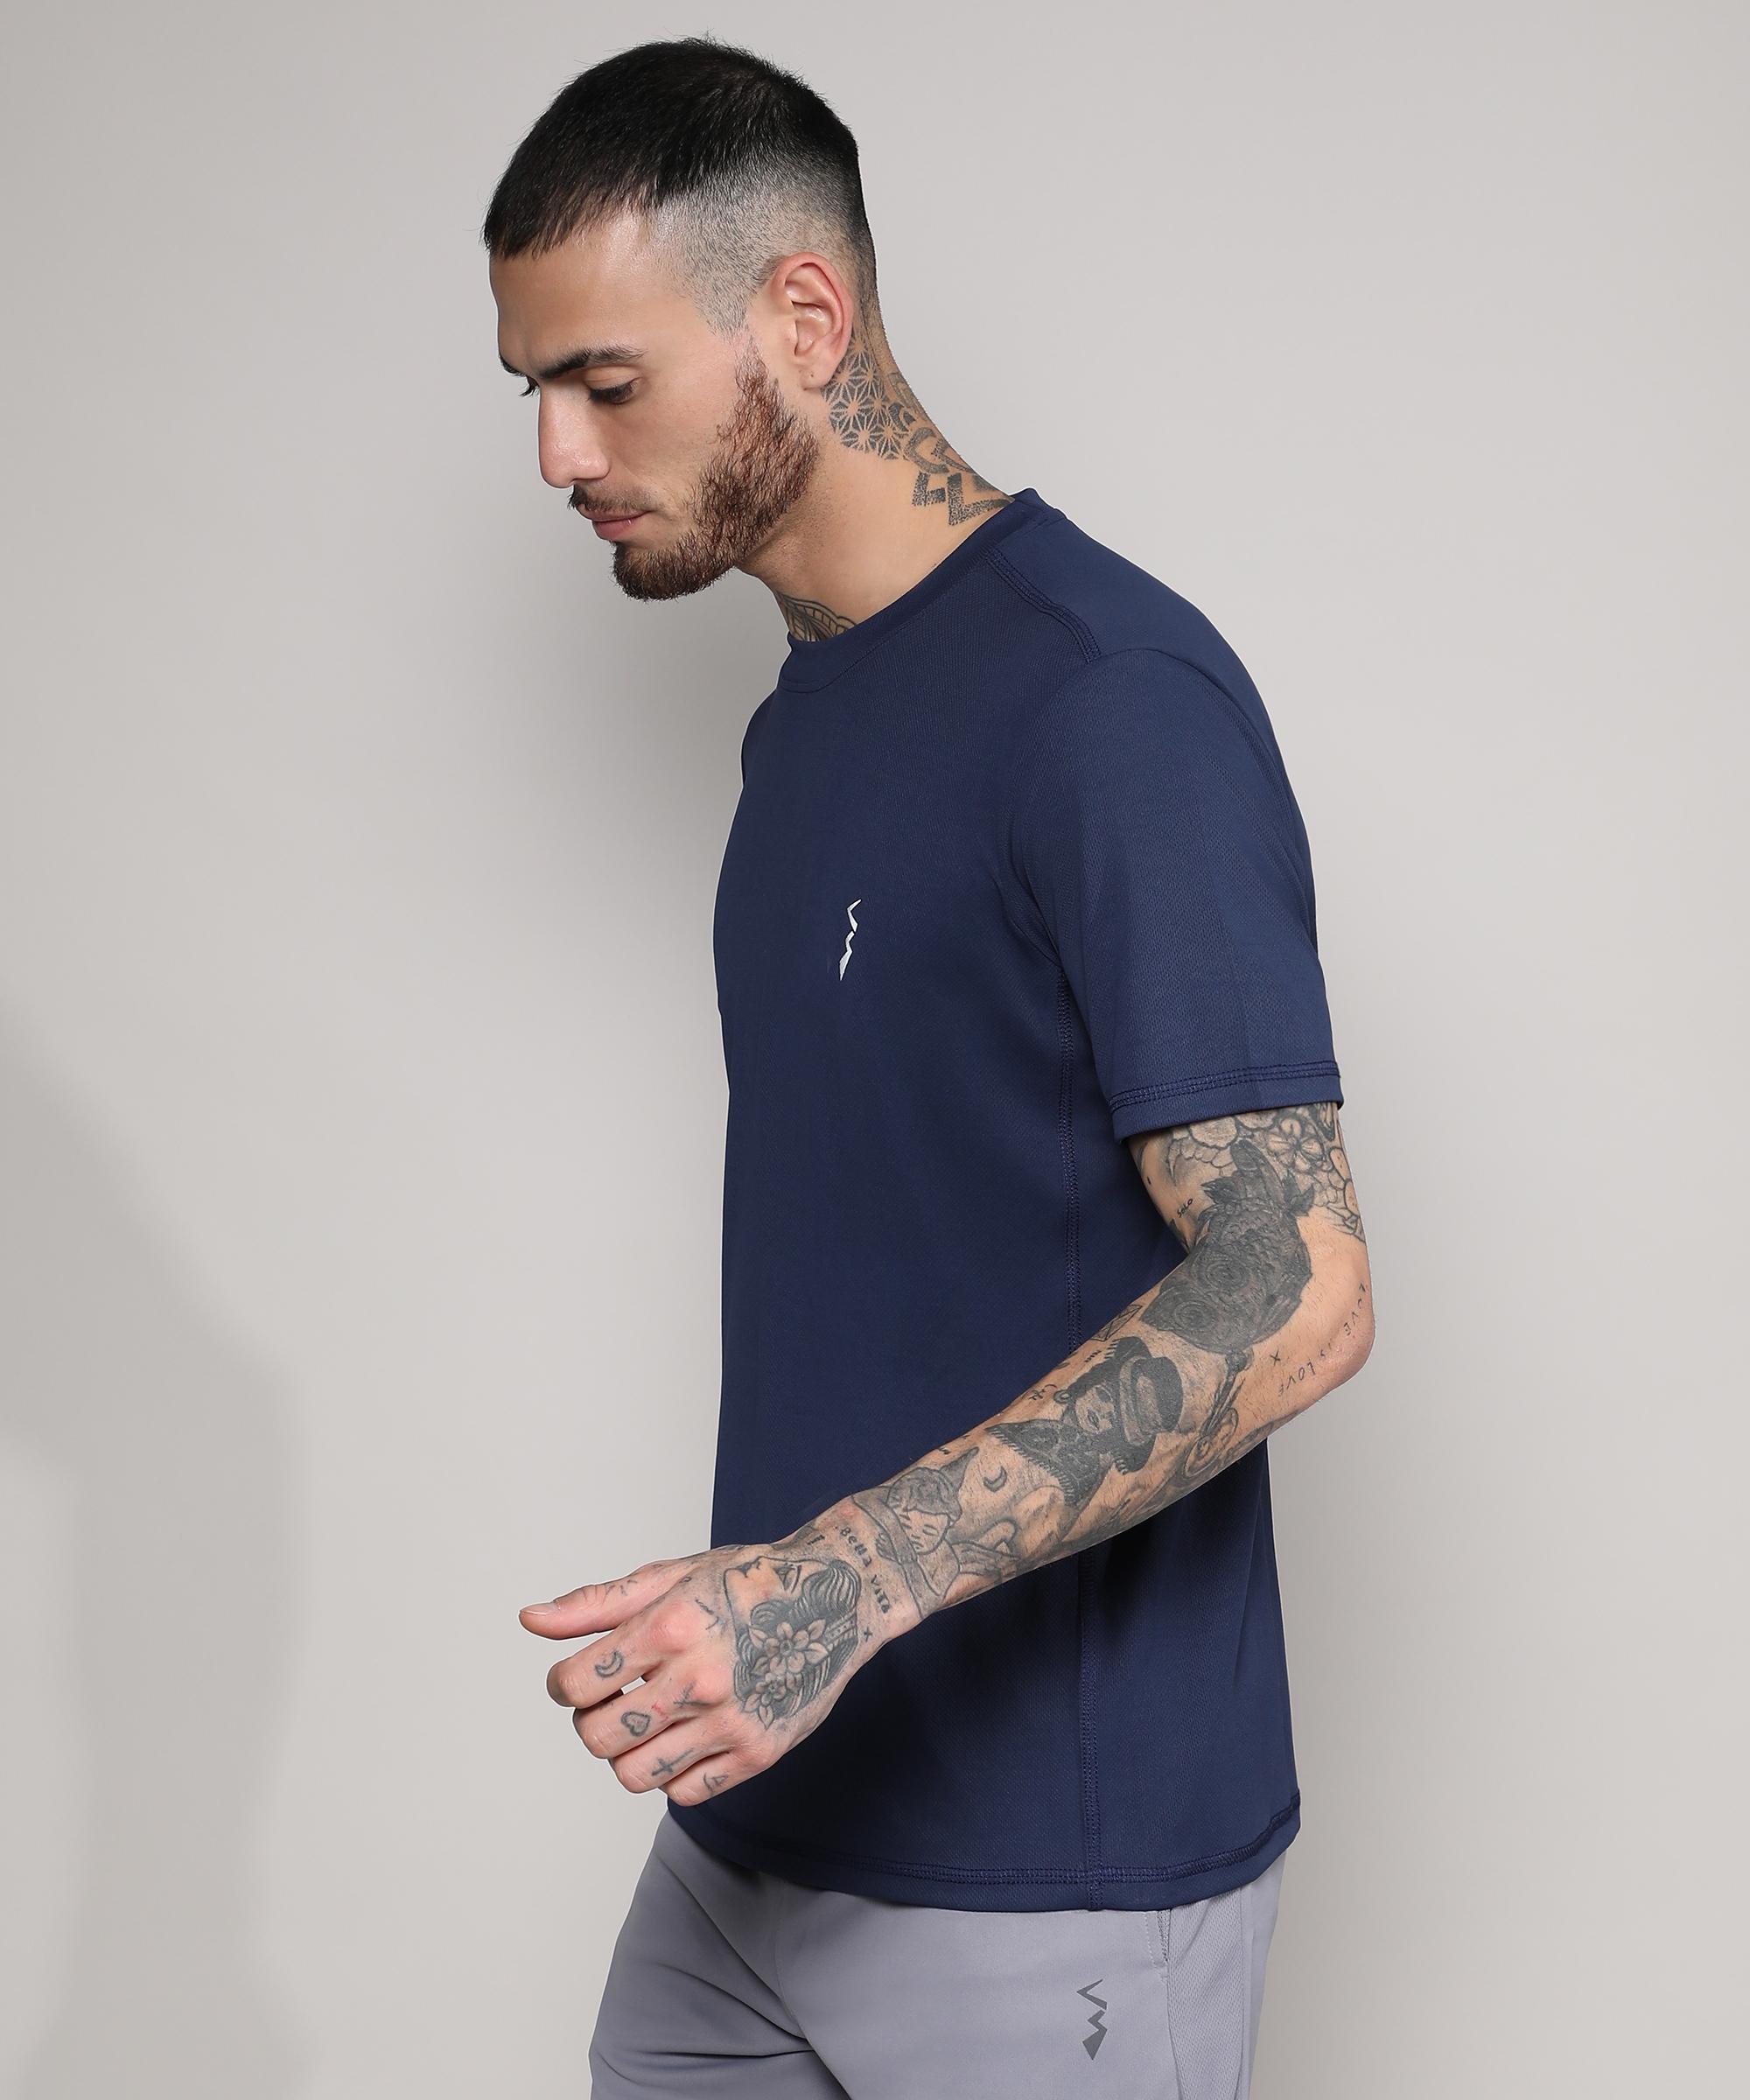 CAMPUS SUTRA | Men's Navy Blue Solid Activewear T-Shirt